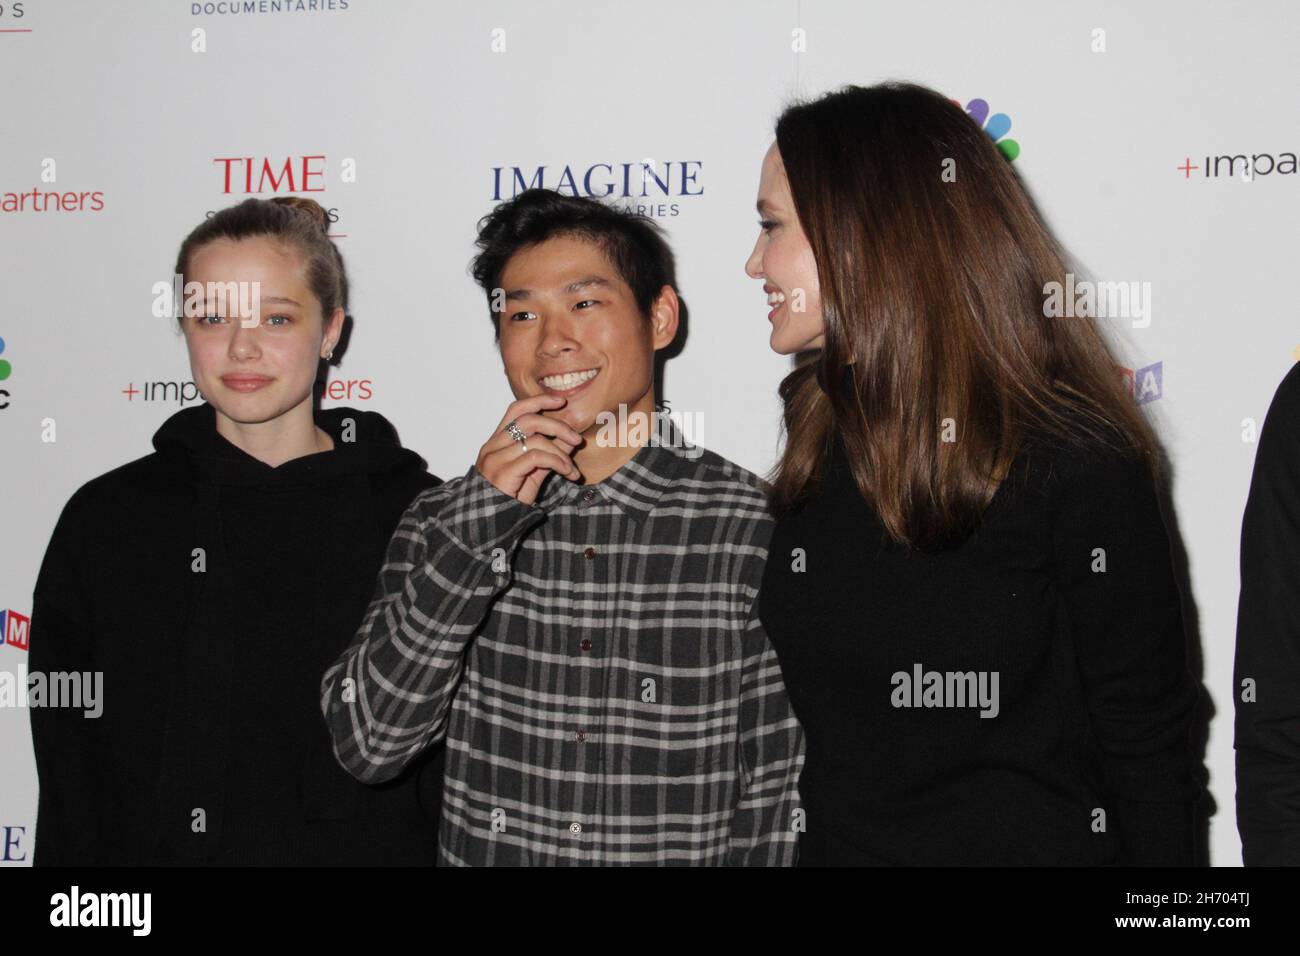 Los Angeles, USA. Nov 18th 2021: Shiloh Jolie-Pitt, Angelina Jolie, Pax Thien Jolie-Pitt 11/18/2021 The Los Angeles Premiere of 'Paper & Glue' held at the Museum of Tolerance in Los Angeles, CA Photo by Izumi Hasegawa/HollywoodNewsWire.net Credit: Hollywood News Wire Inc./Alamy Live News Stock Photo